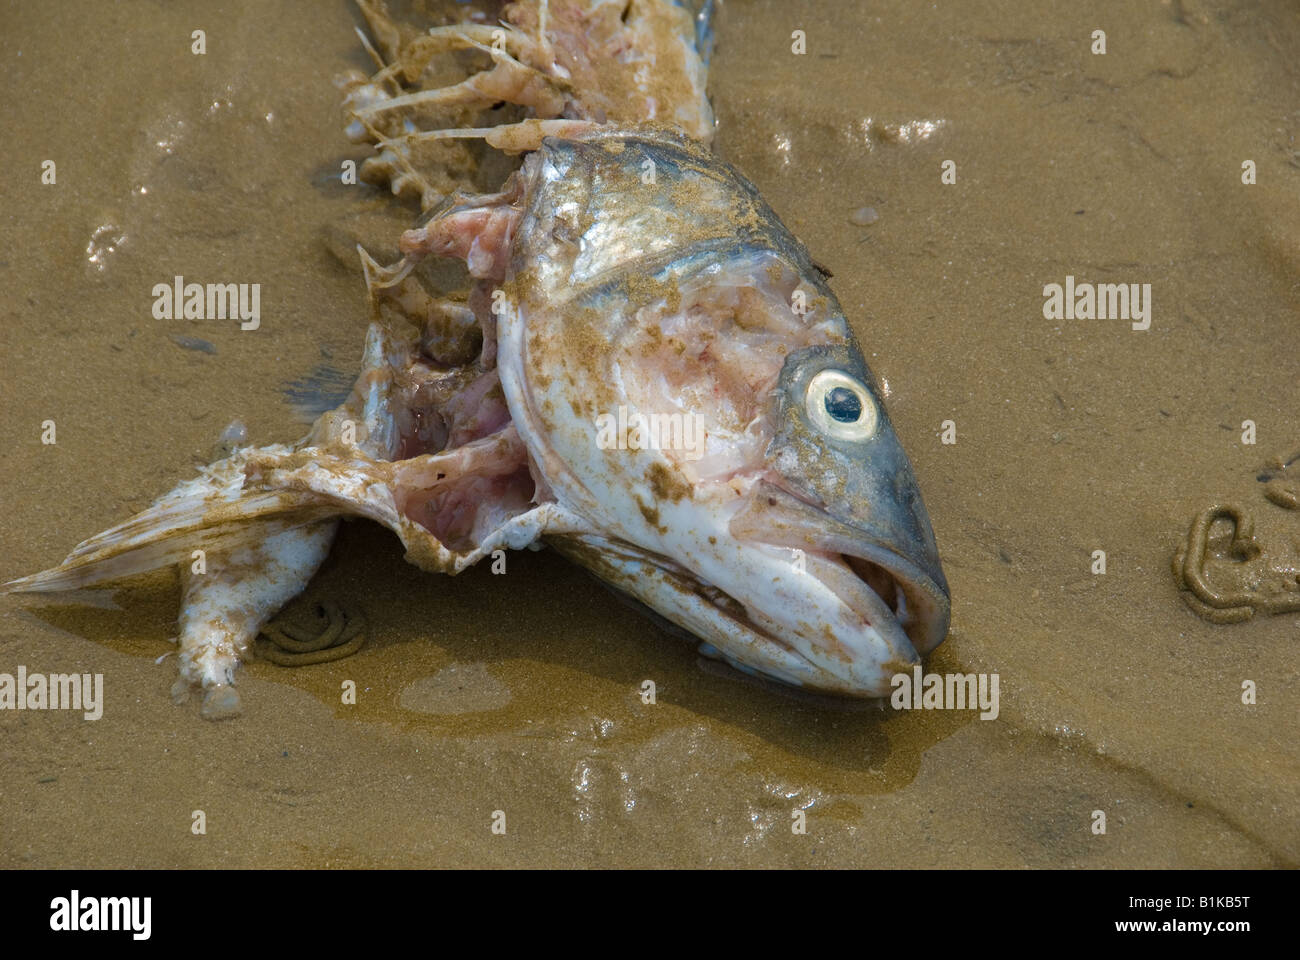 A Dead Gutted Fish lying on the beach Stock Photo